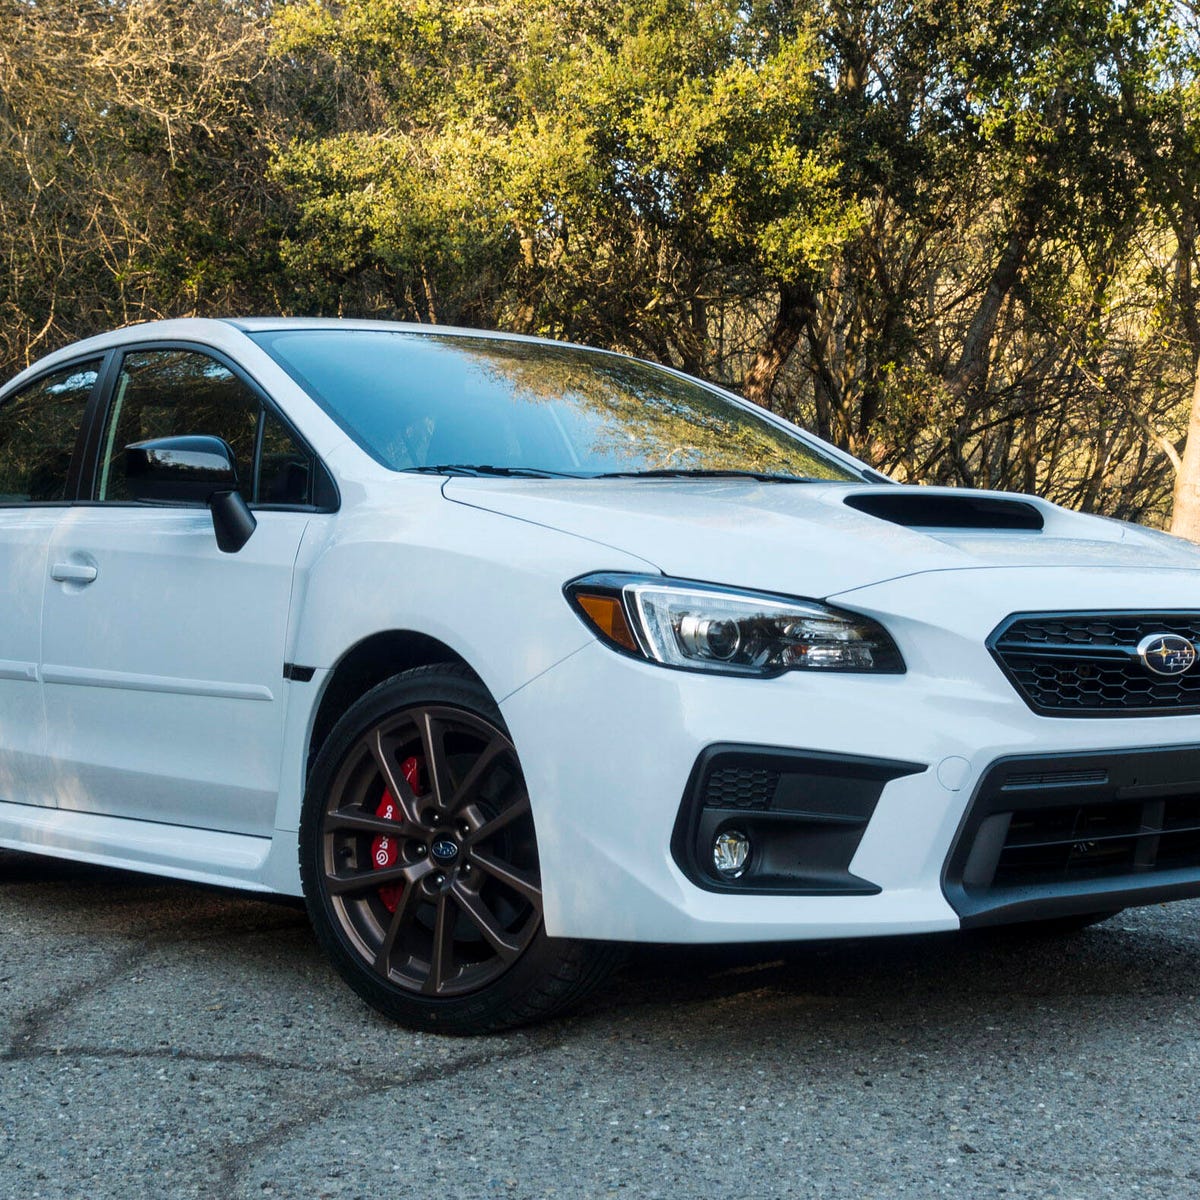 2020 Subaru WRX review: Happiness on the cheap - CNET